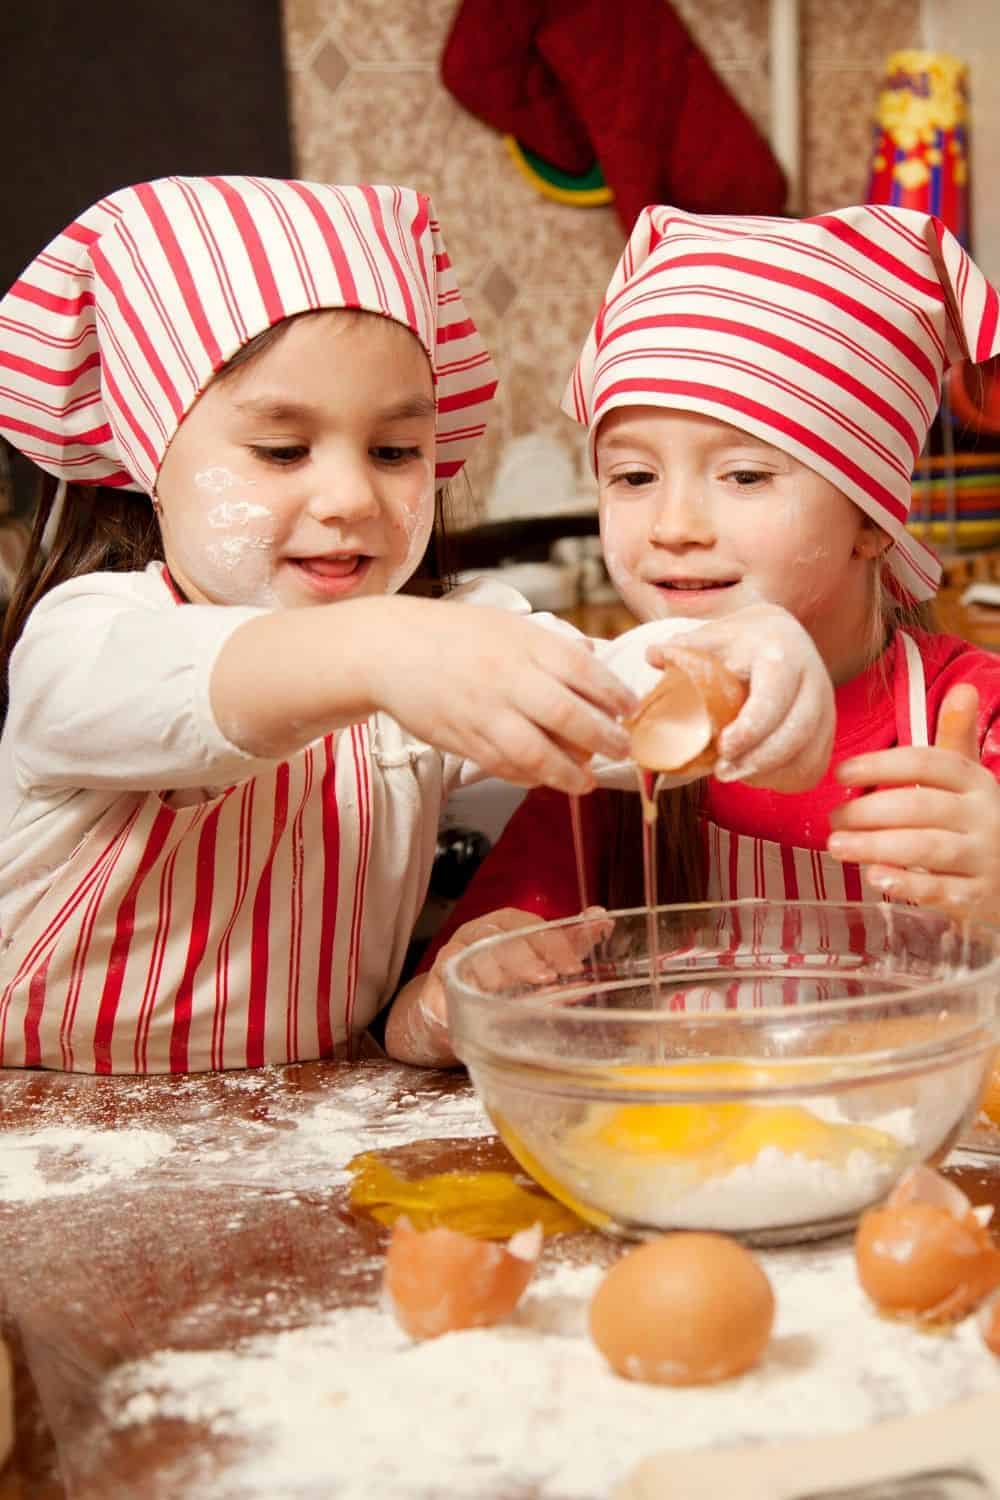 5 Fun Reasons to Teach Your Kids to Bake